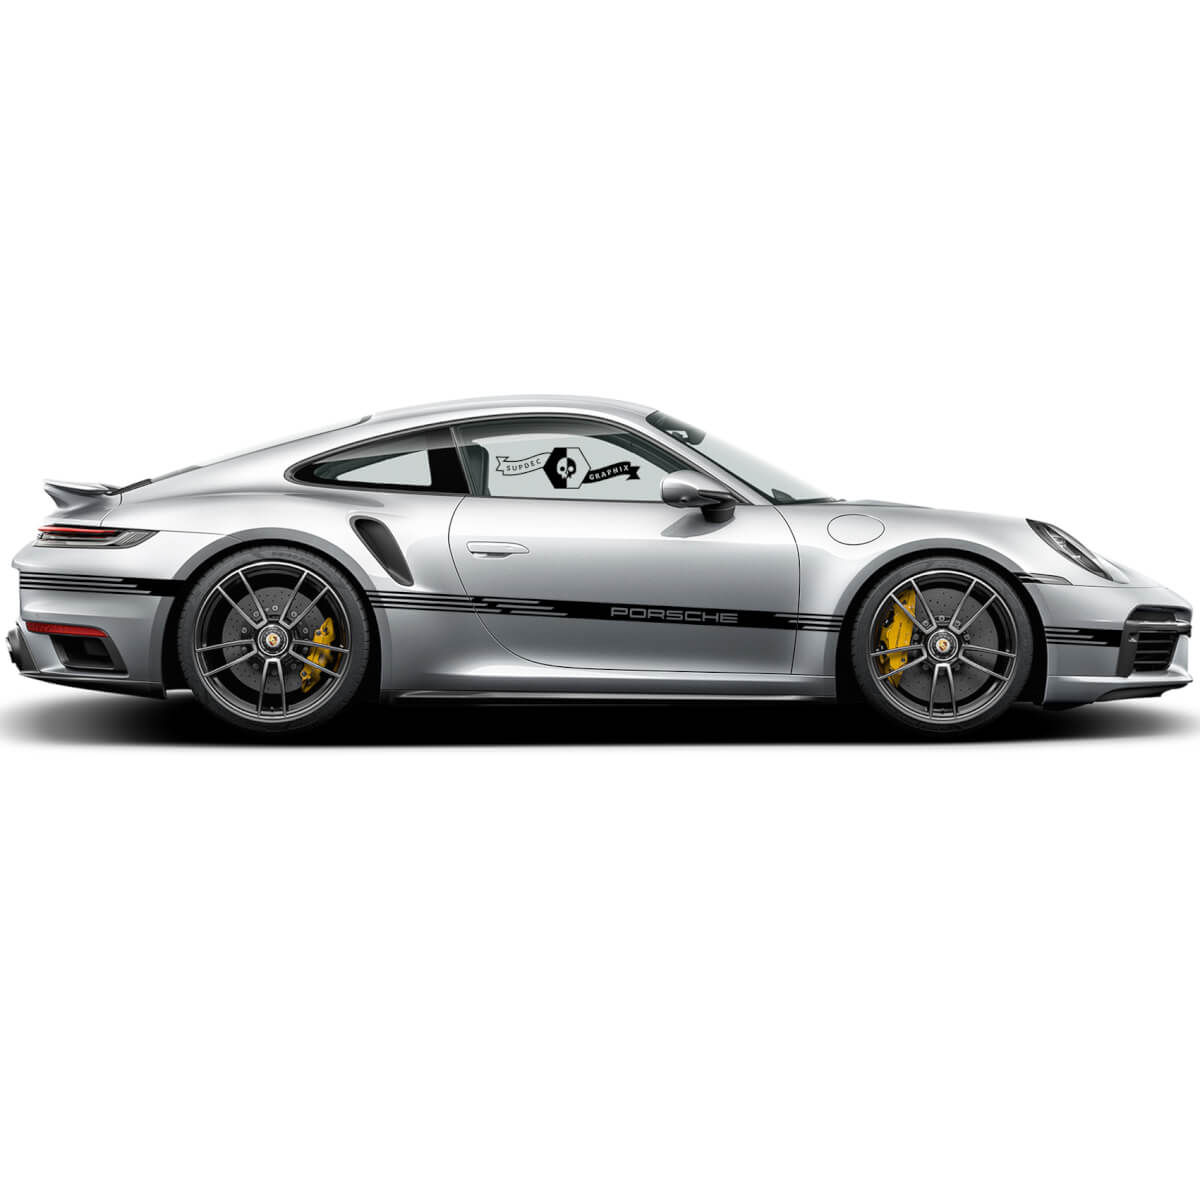 New Pair Porsche 911 Turbo S side Full body Line Stripes Graphics for Vinyl Stickers Decals